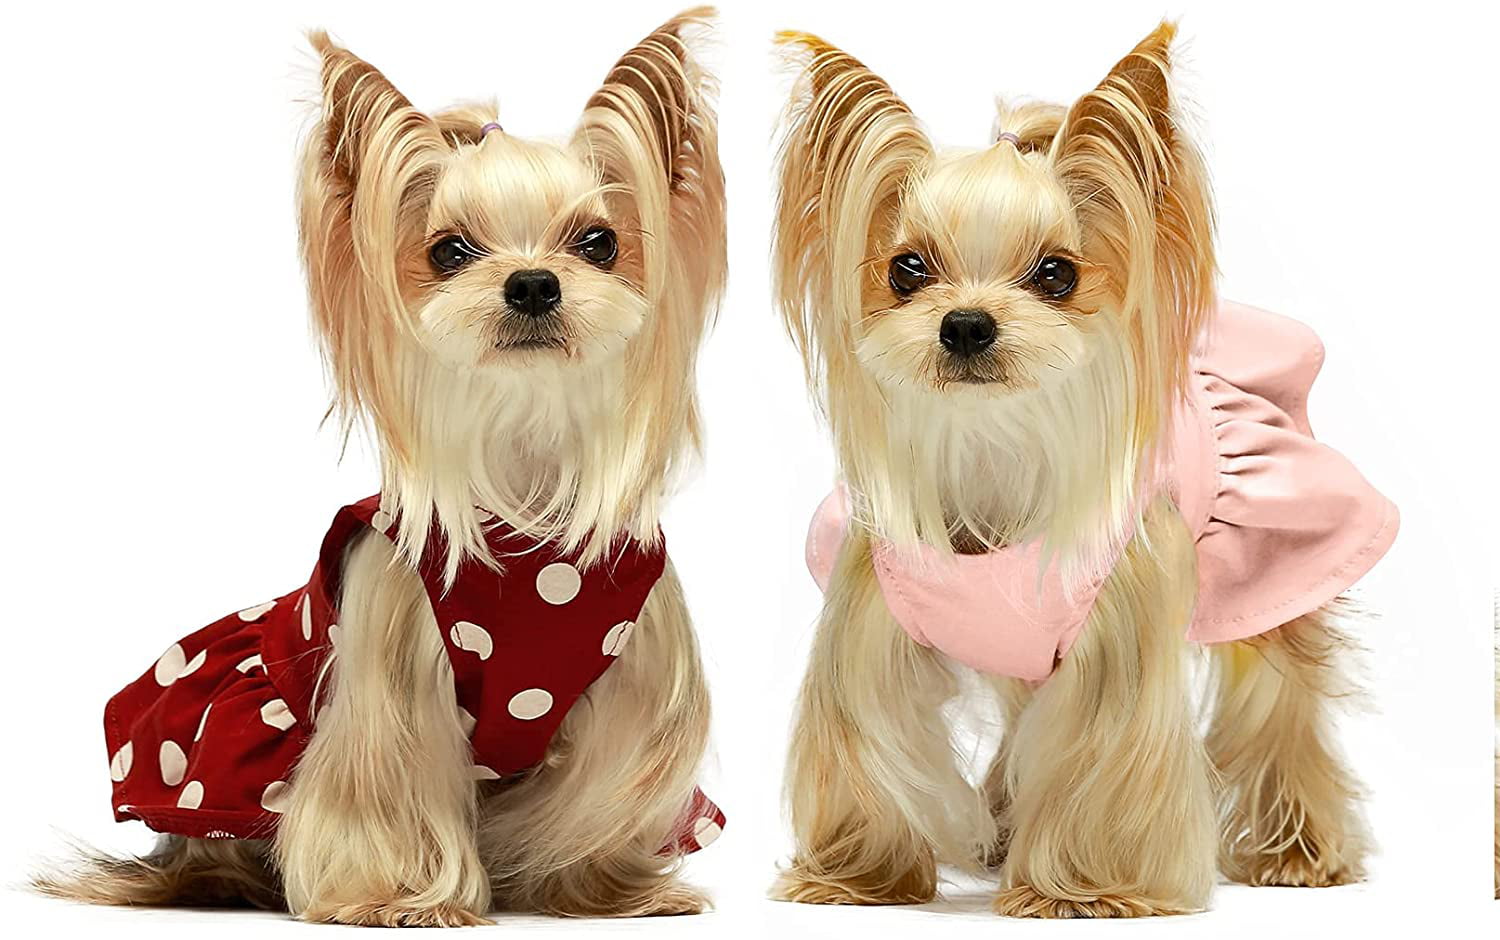 JACKY-Store Small Dog Cat Pet Printed Shirt Dress Fly Sleeve Dress for Pet Summer Pet Dog Clothes Puppy Dog Cat Vest Shirt Fake Strap Dog Clothes Pet Grid Skirt for Small Medium Pets